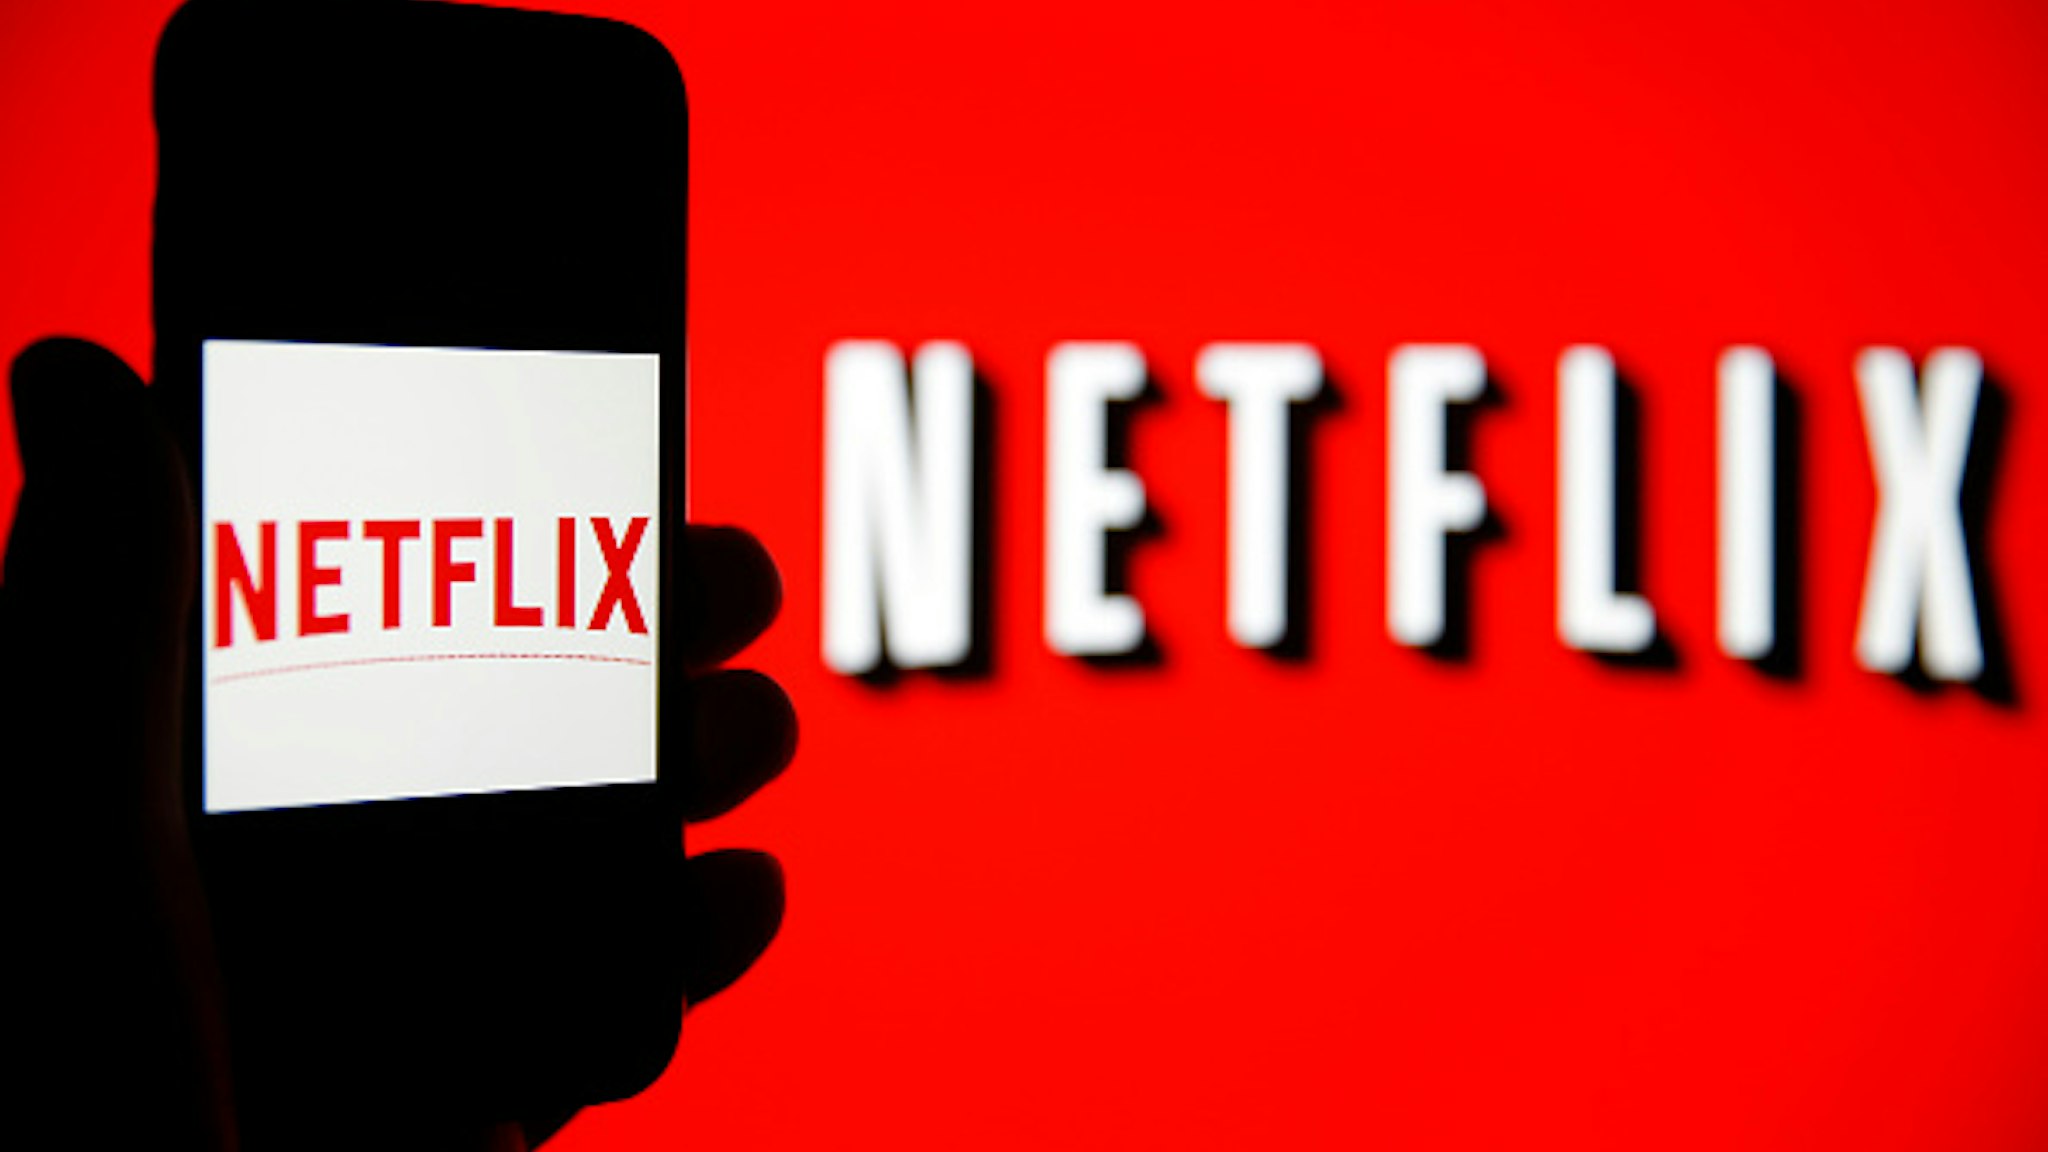 PARIS, FRANCE - FEBRUARY 13: In this photo iIllustration, the Netflix logo is seen on the screen of an iPhone in front of a computer screen showing a Netflix logo on February 13, 2019 in Paris, France. Netflix, the US giant of online video subscription, has more than 5 million subscribers in France, 4 and a half years after its arrival in France in September 2014, a spokesman for the company revealed on Wednesday. Netflix offers movies and TV series over the internet and now has 137 million subscribers worldwide.